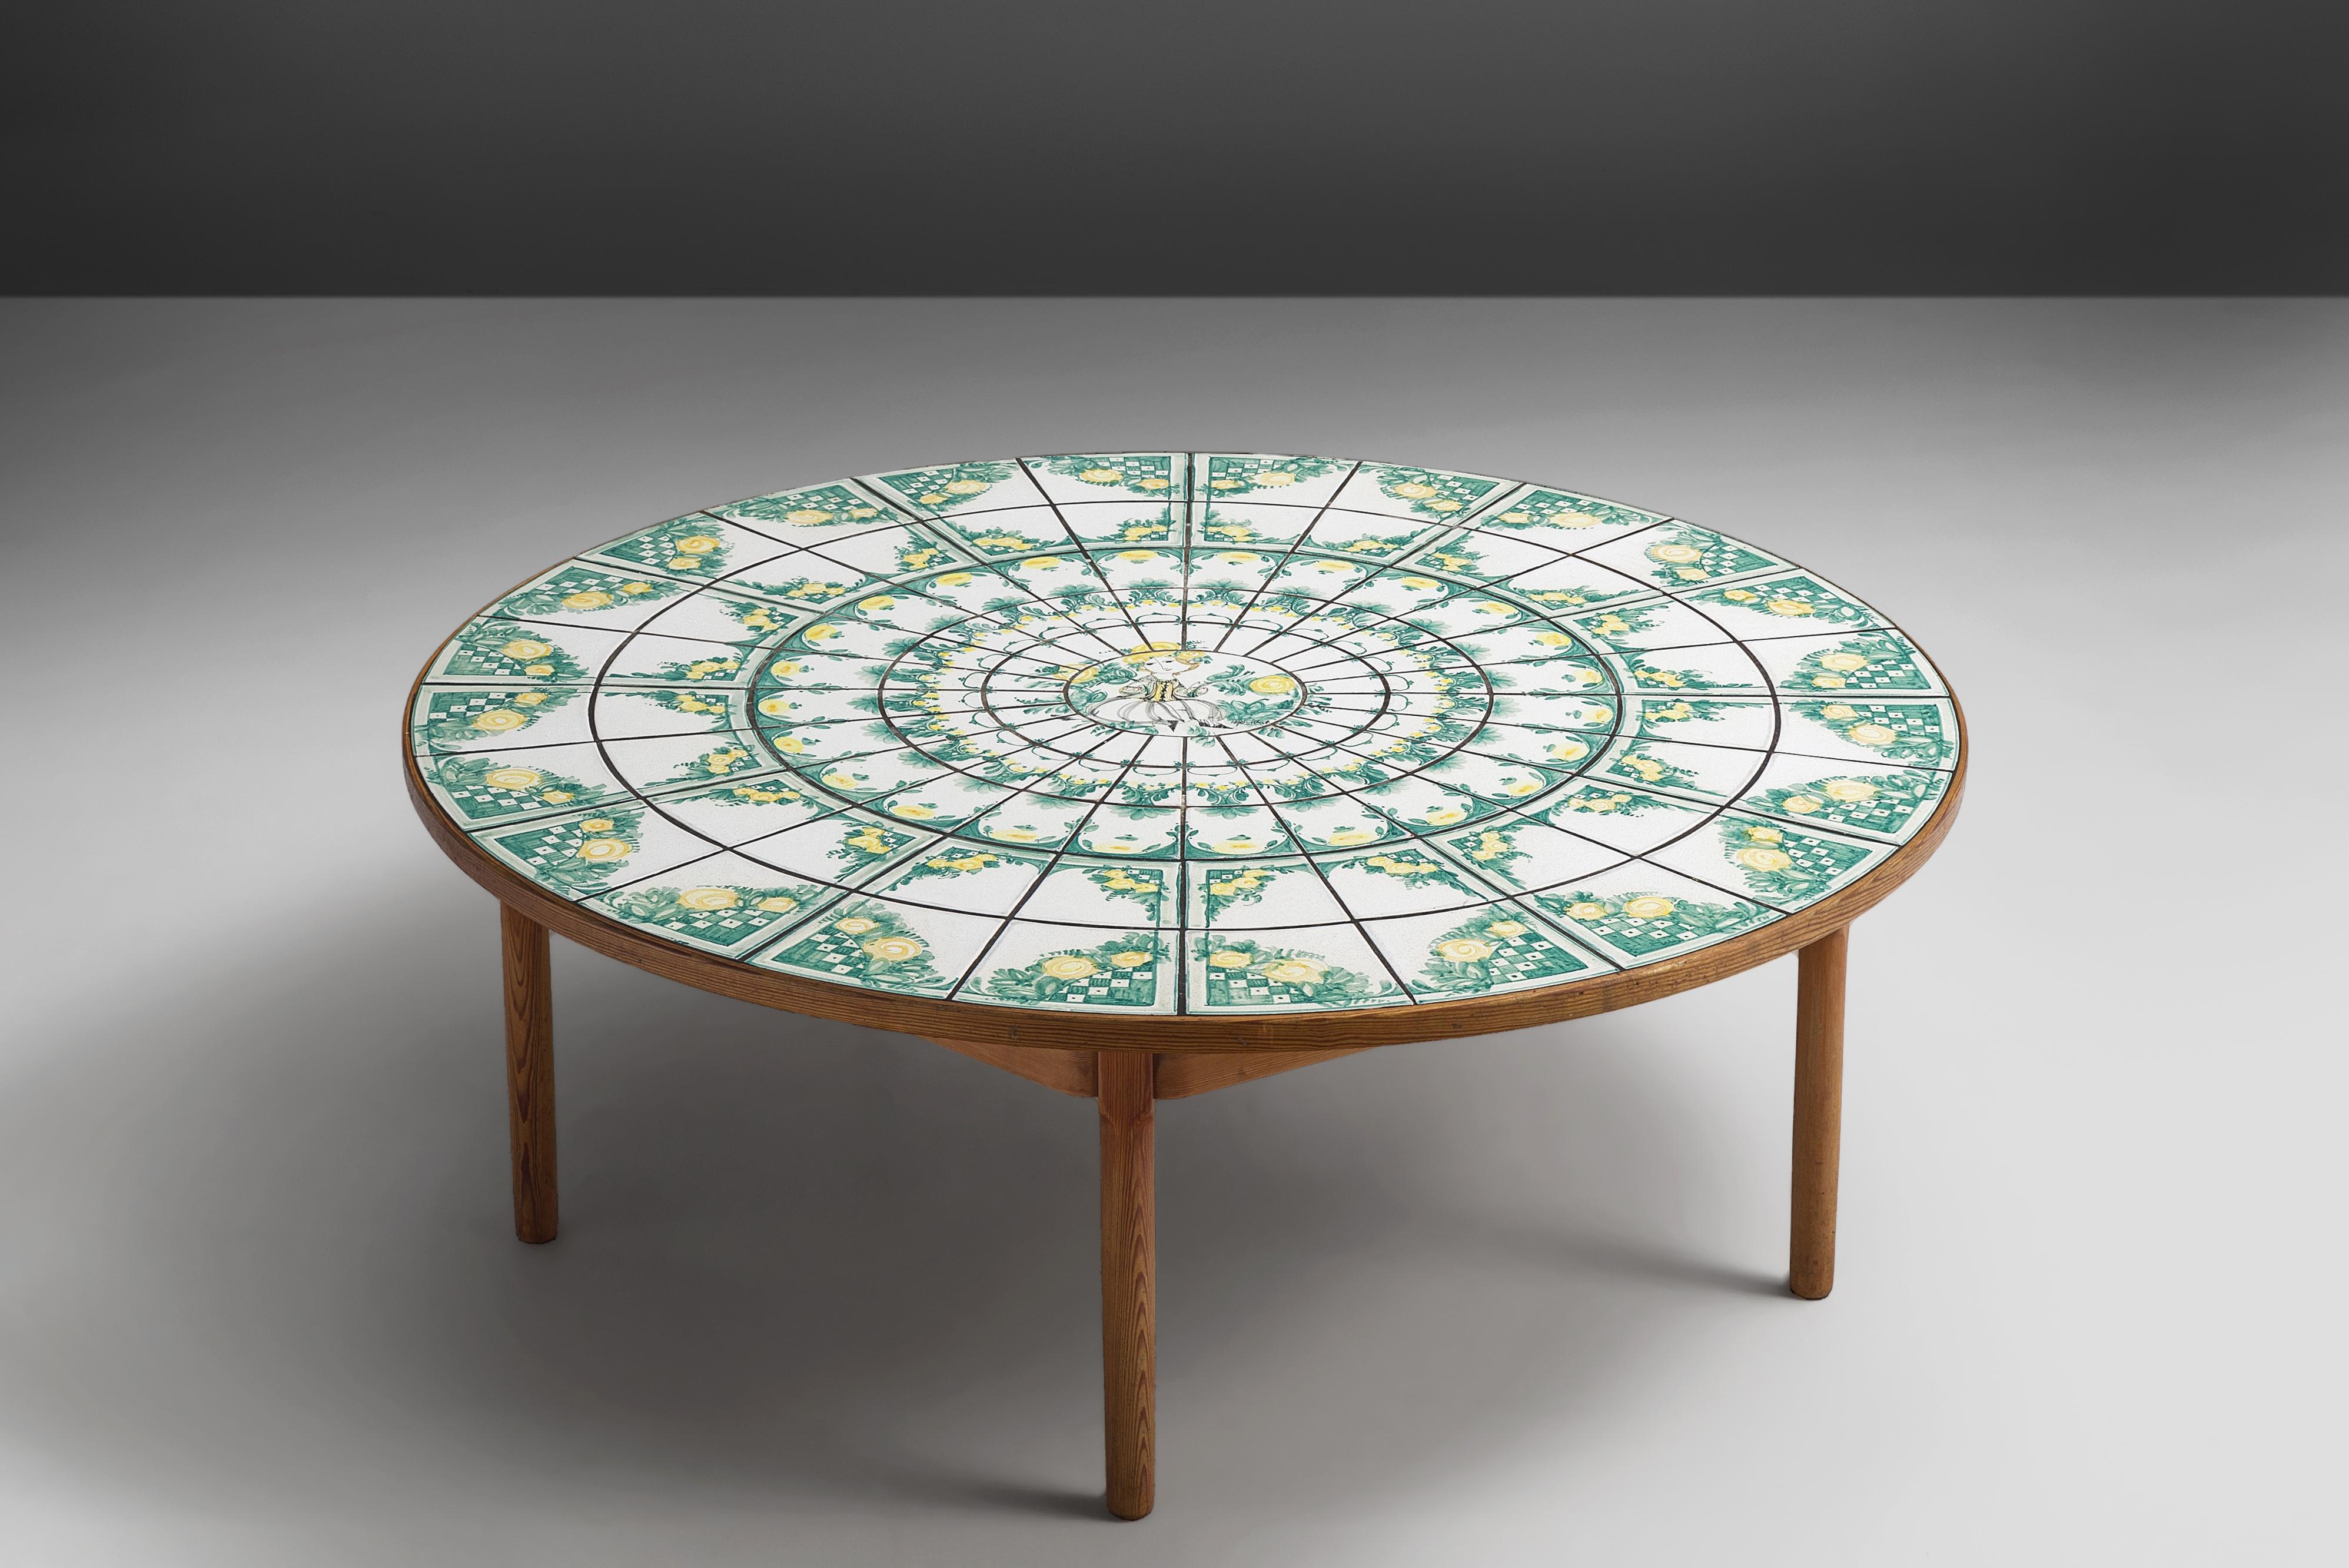 Bjørn Wiinblad, coffee table, ceramic tiles, wood, Denmark, 1970s

This ceramic coffee table is decorated with hand painted ceramic tiles in twining vines, floral wreaths and trees in green and white. In the center a human figure decorates the top.